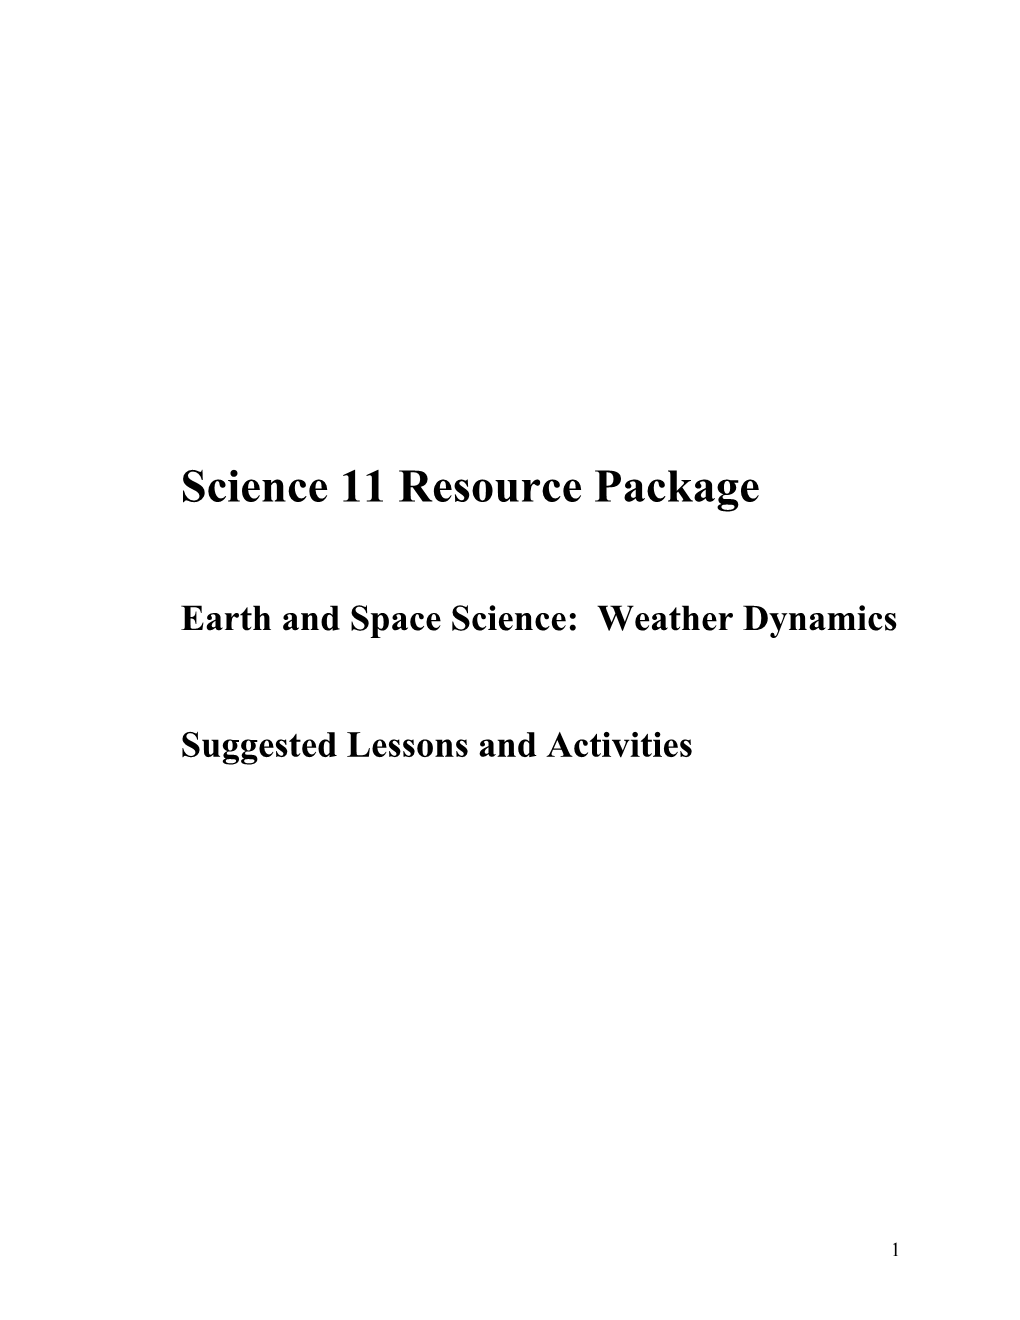 Earth and Space Science: Weather Dynamics Suggested Lessons and Activities